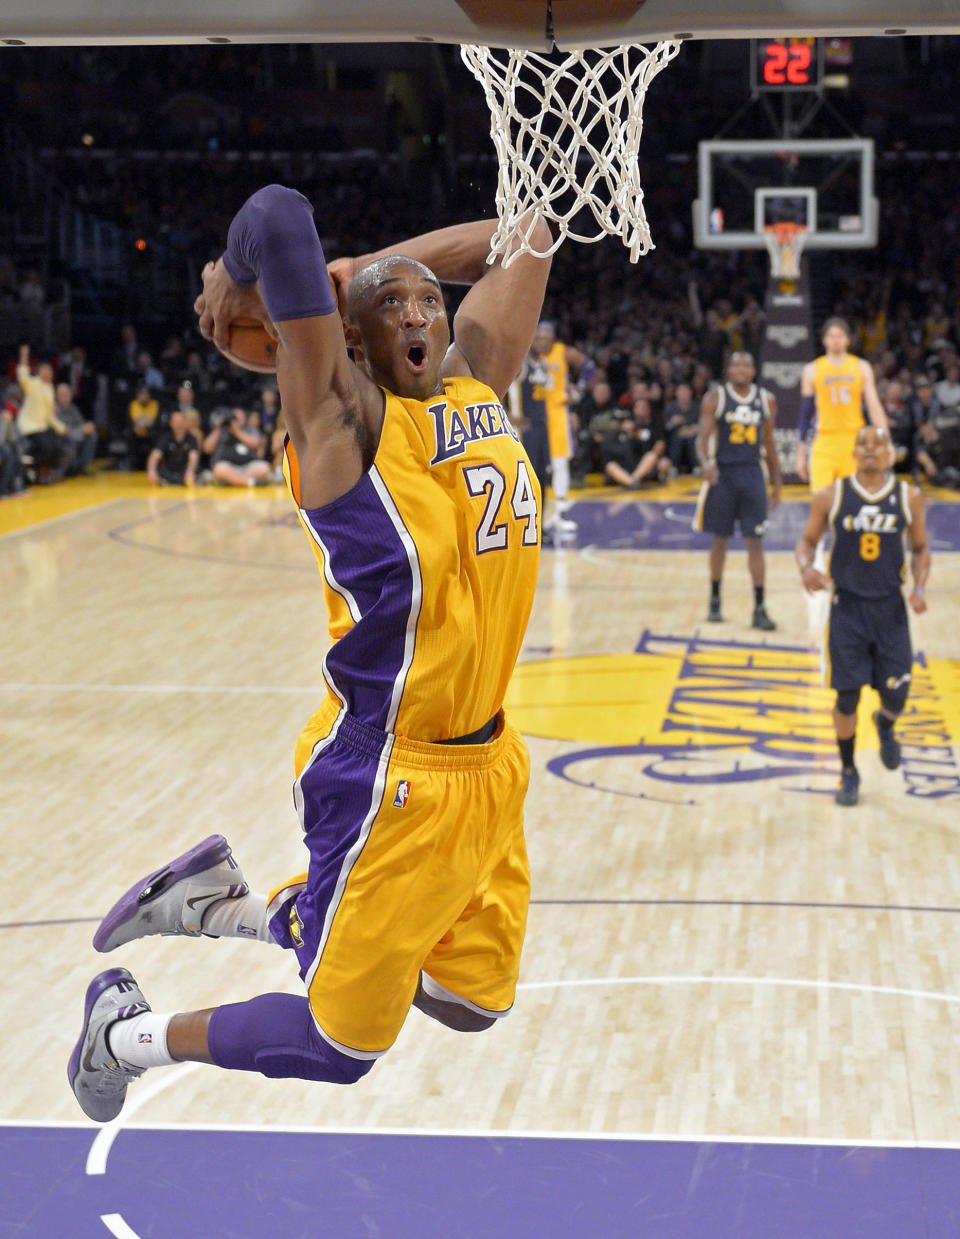 FILE - Los Angeles Lakers guard Kobe Bryant goes up for a dunk during the first half of an NBA basketball game against the Utah Jazz in Los Angeles, in this Friday, Jan. 25, 2013, file photo. Kobe Bryant, Tim Duncan and Kevin Garnett. Each was an NBA champion, an MVP, an Olympic gold medalist, annual locks for All-Star and All-Defensive teams. And now, the ultimate honor comes their way: On Saturday night, May 15, 2021, in Uncasville, Connecticut, they all officially become members of the Naismith Memorial Basketball Hall of Fame. (AP Photo/Mark J. Terrill, File)